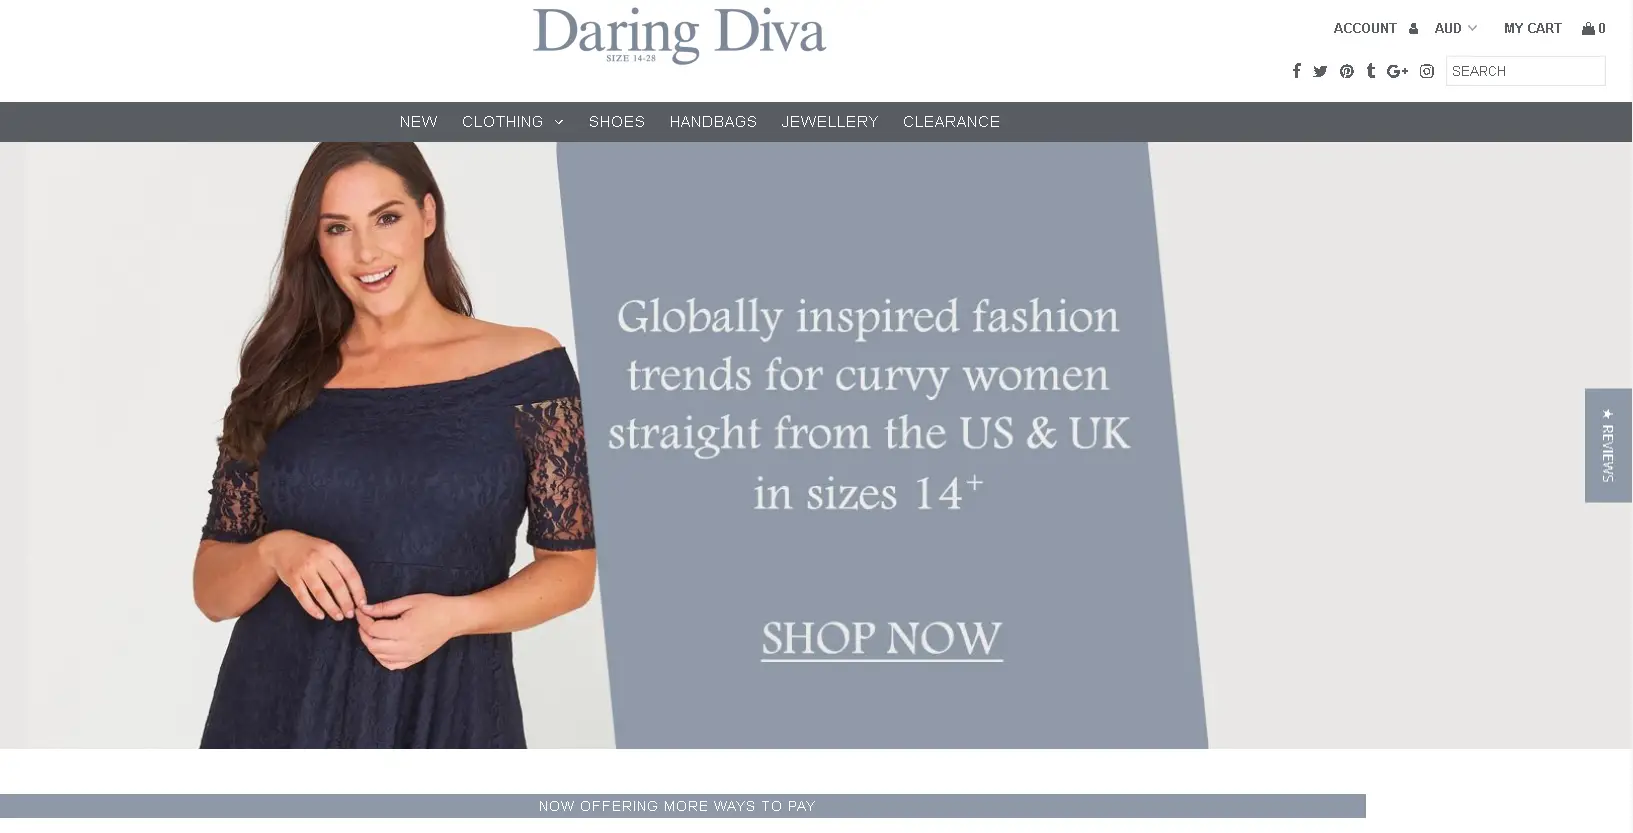 This is a screenshot of Daring Diva's website. They cater to plus sized women's fashion and have an affiliate program you can use to refer new customers. 